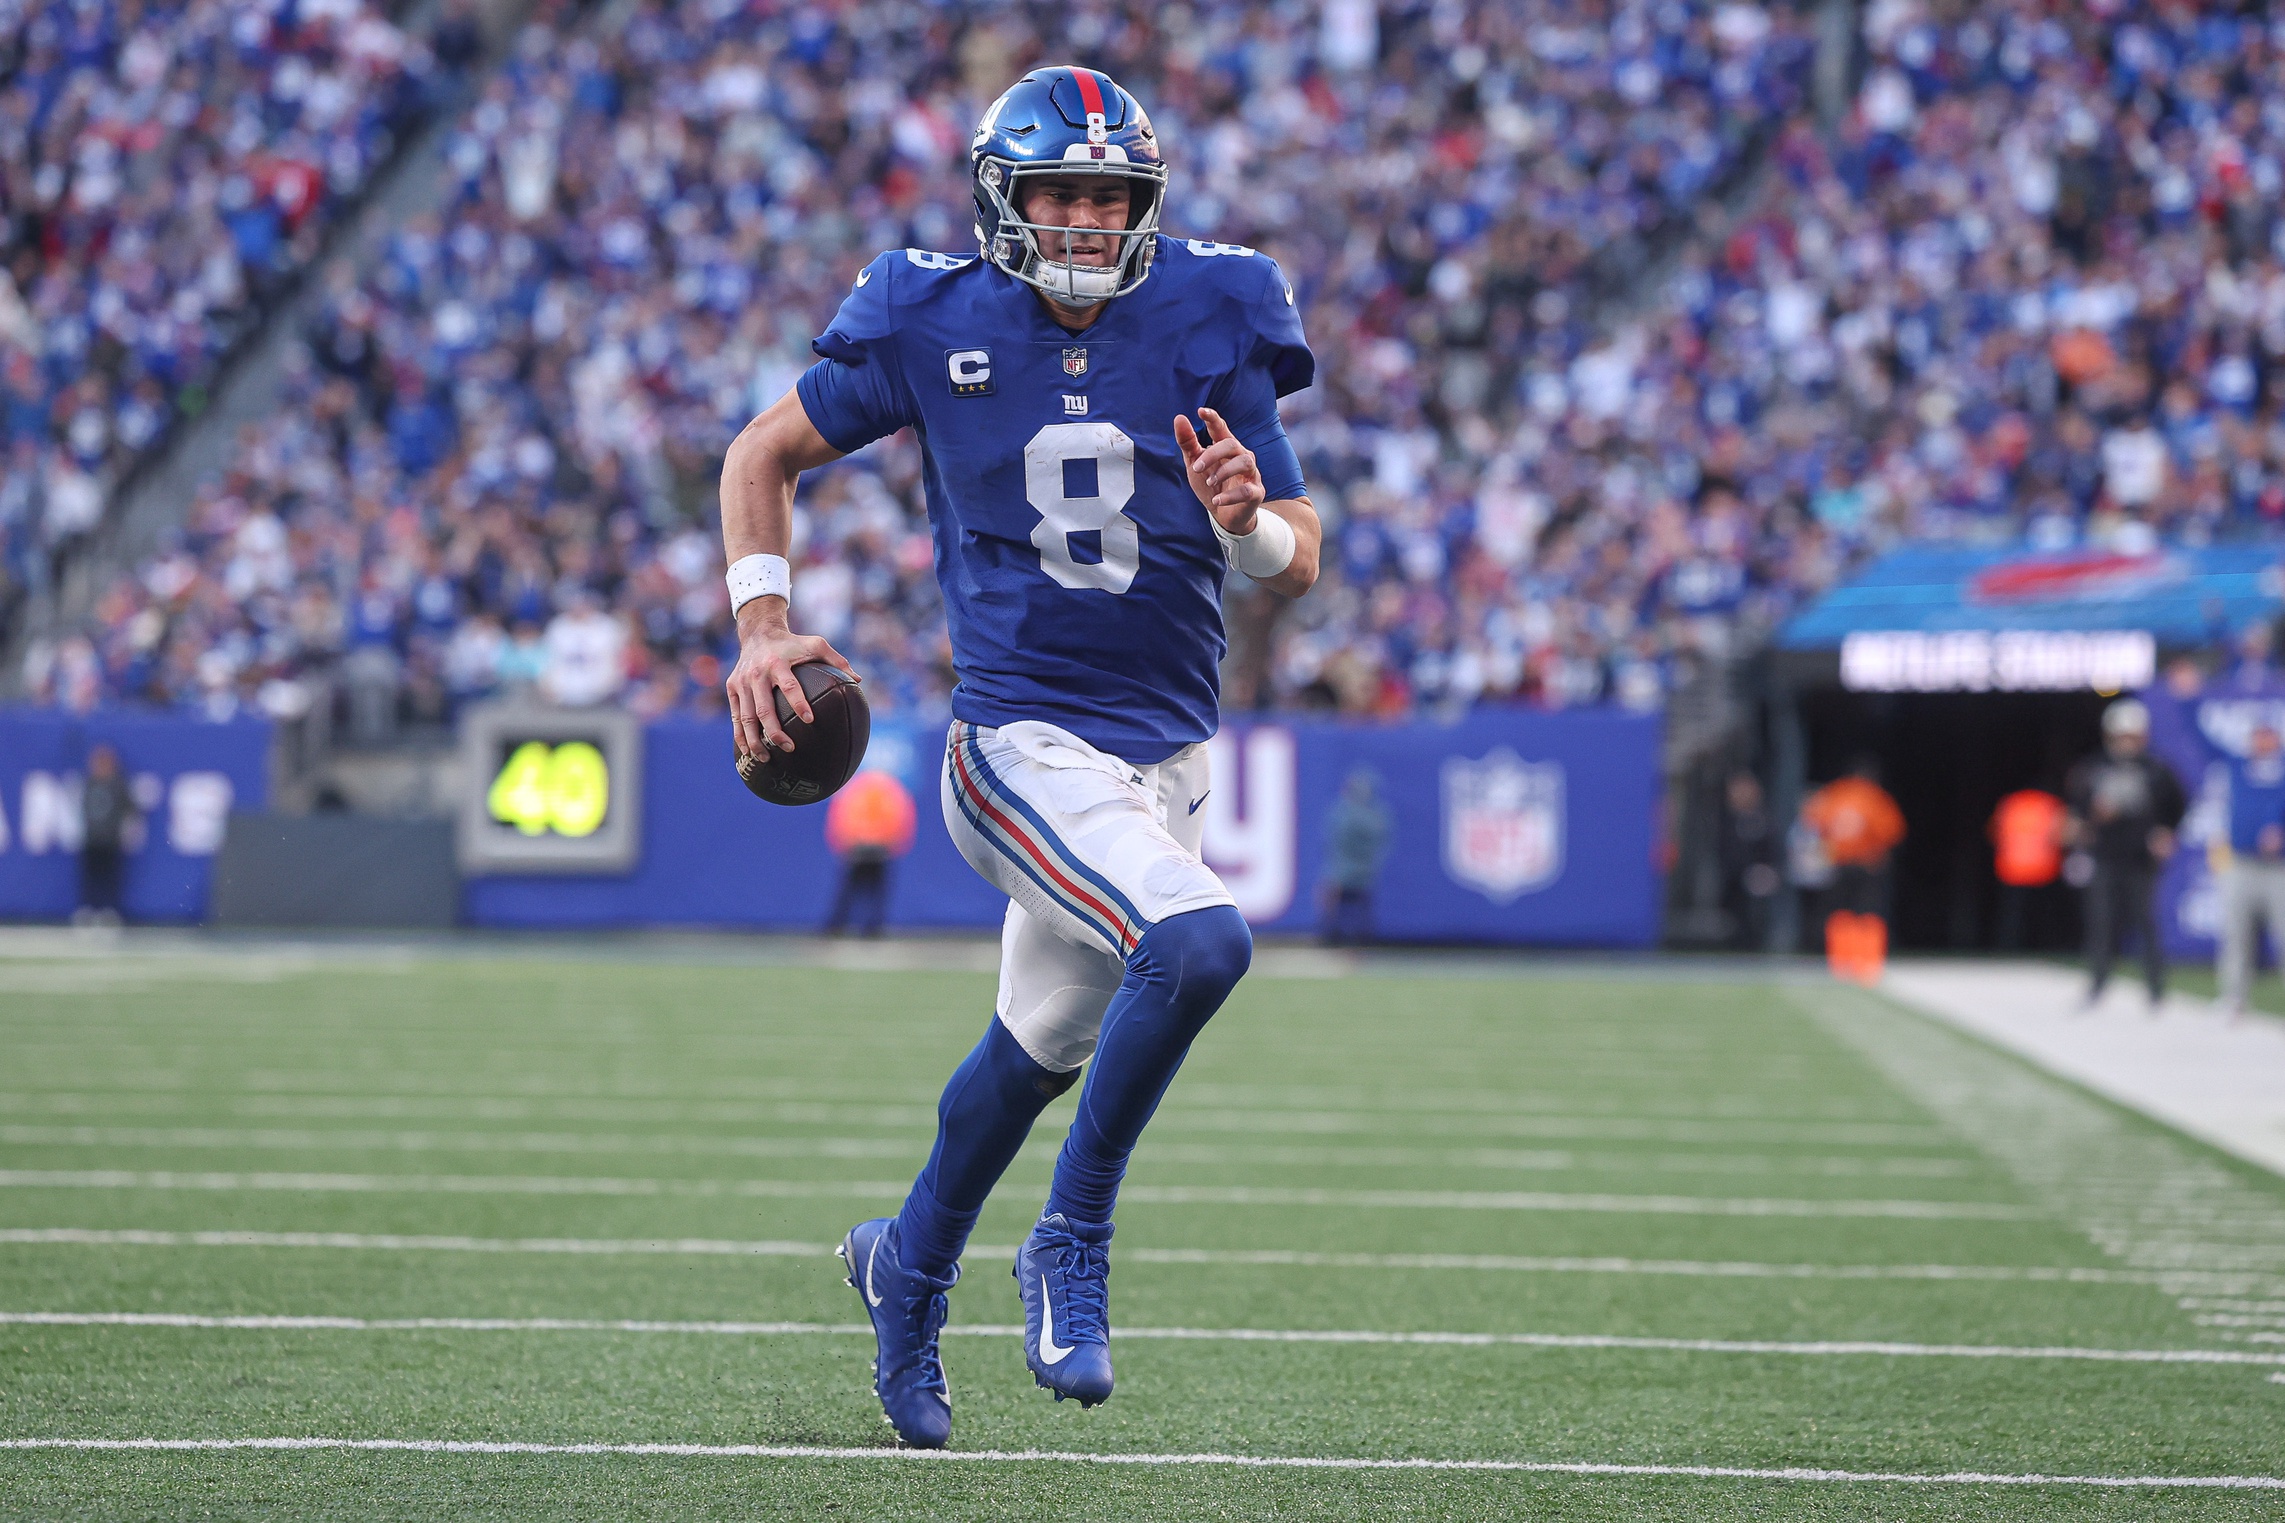 Fantasy Football: Potential bargains, must-plays from Giants